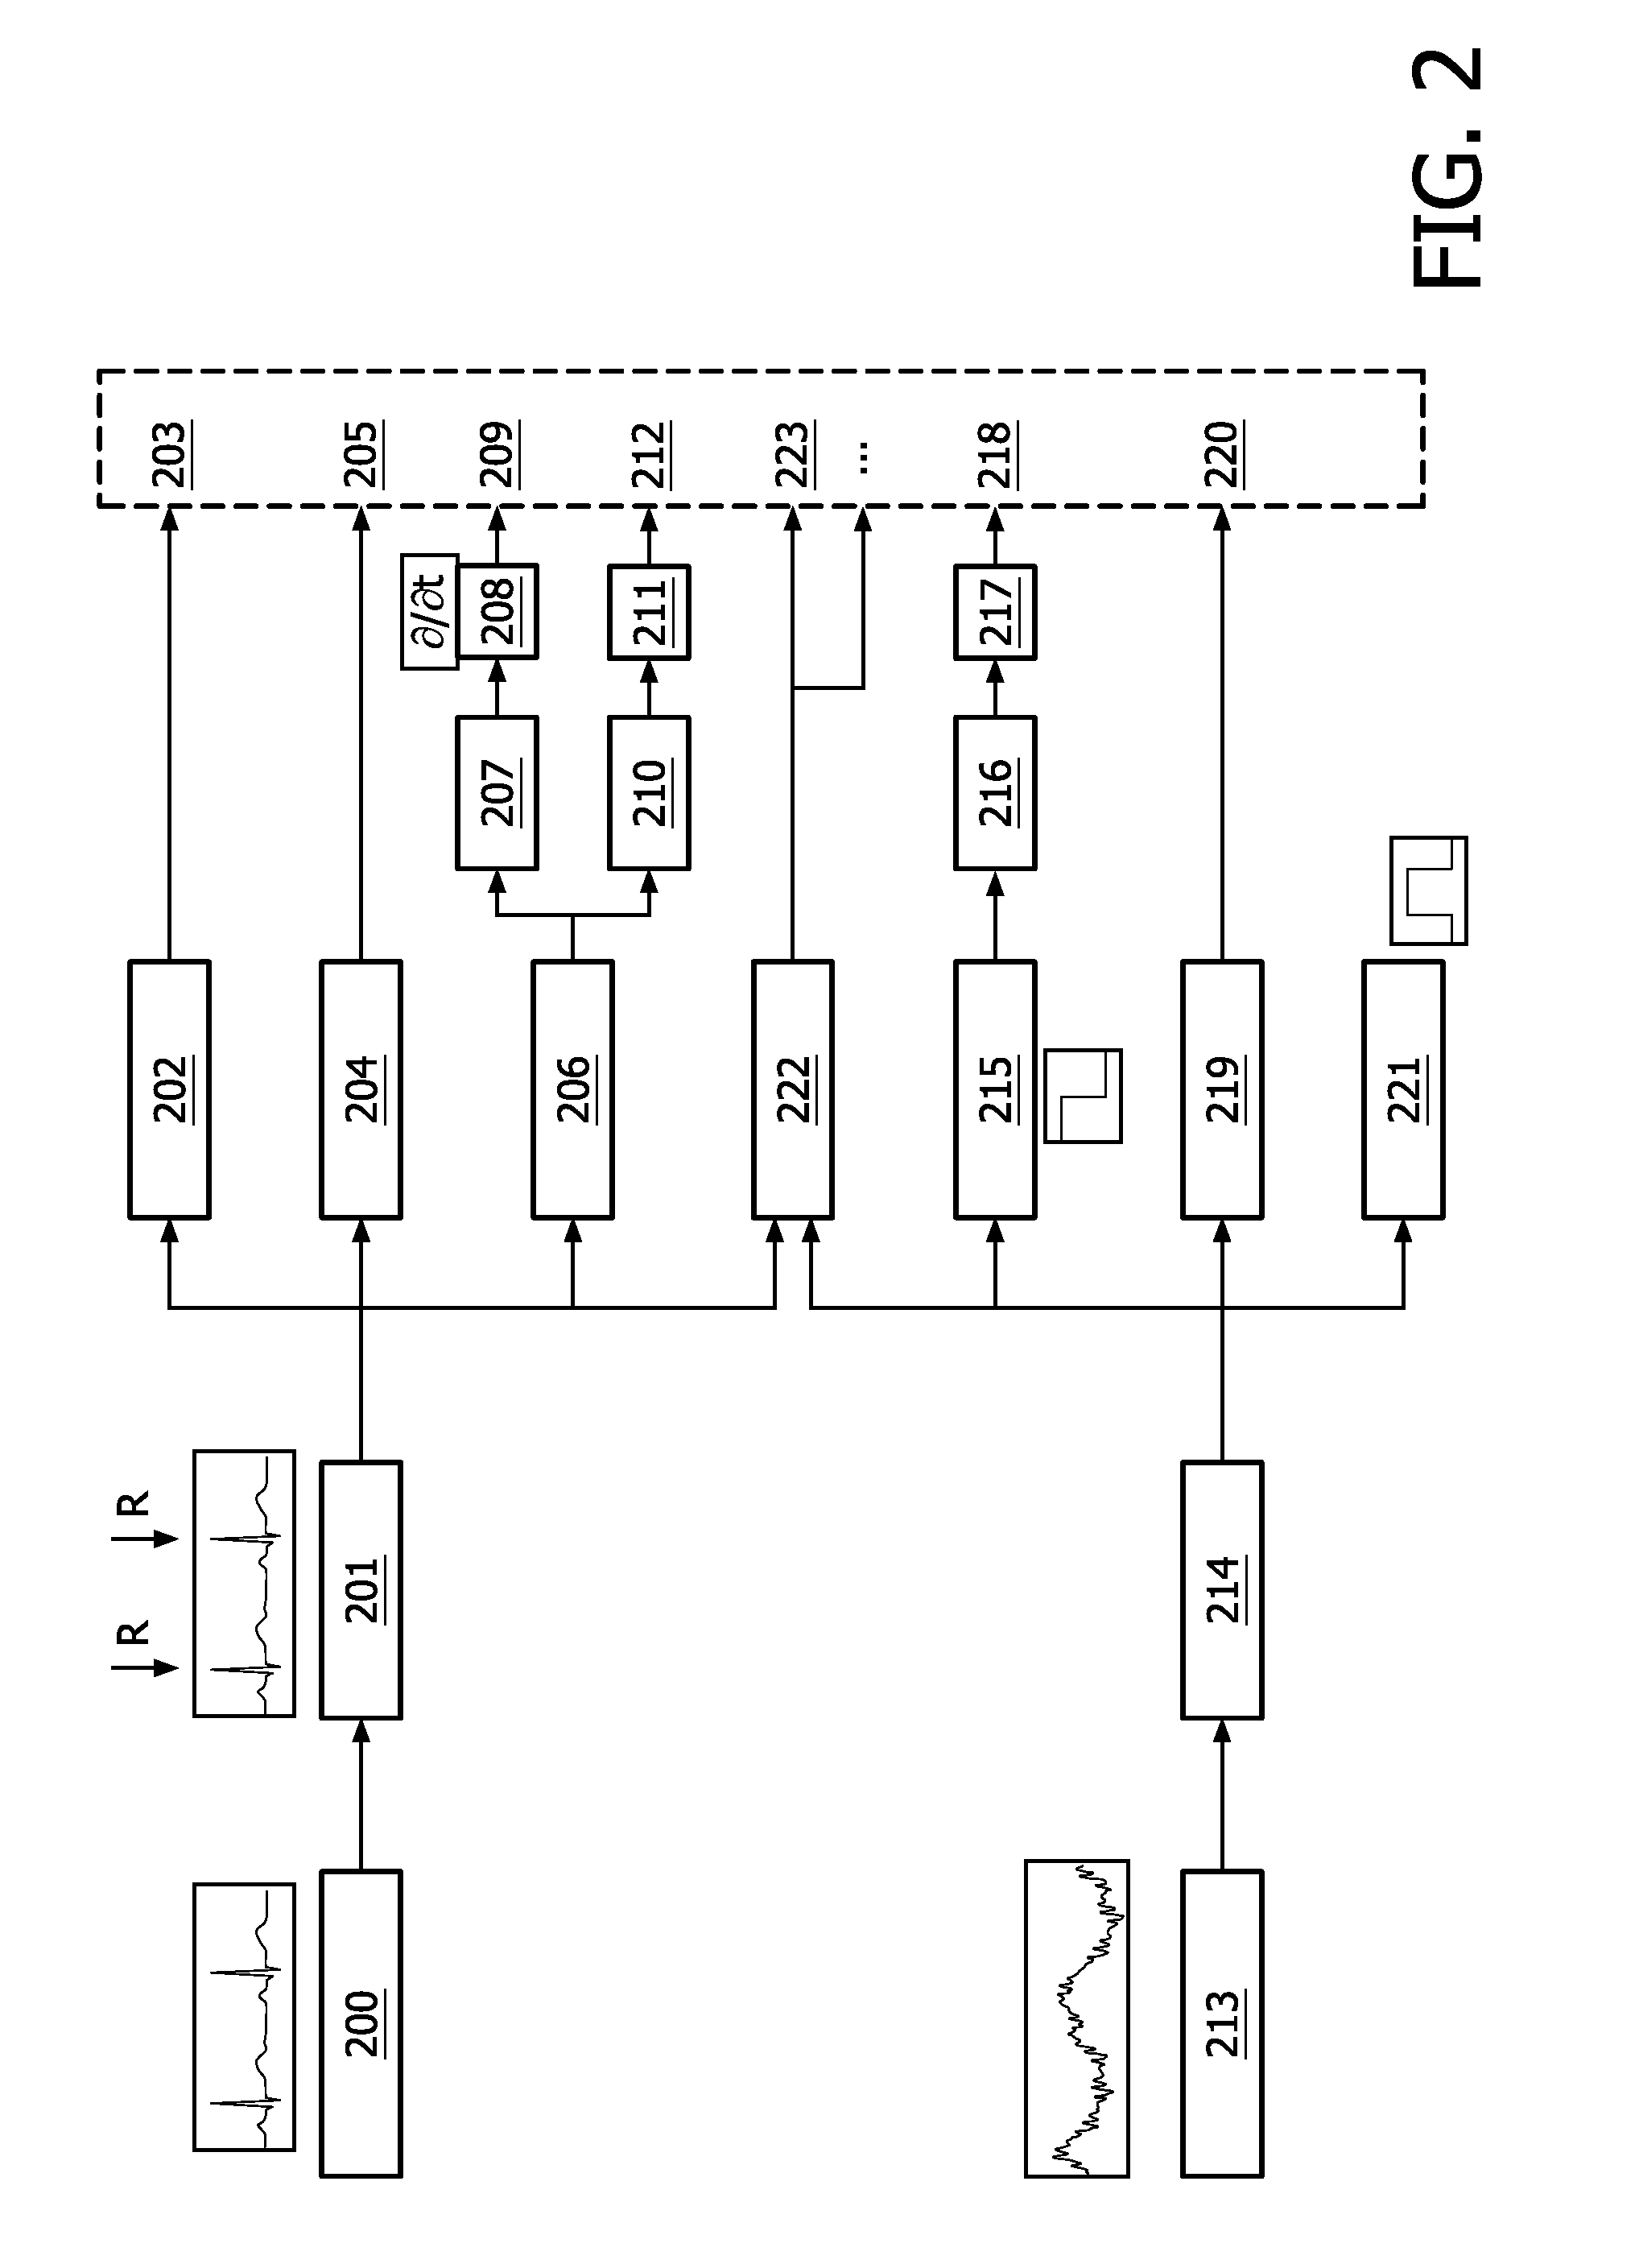 Method and system for sleep/wake condition estimation